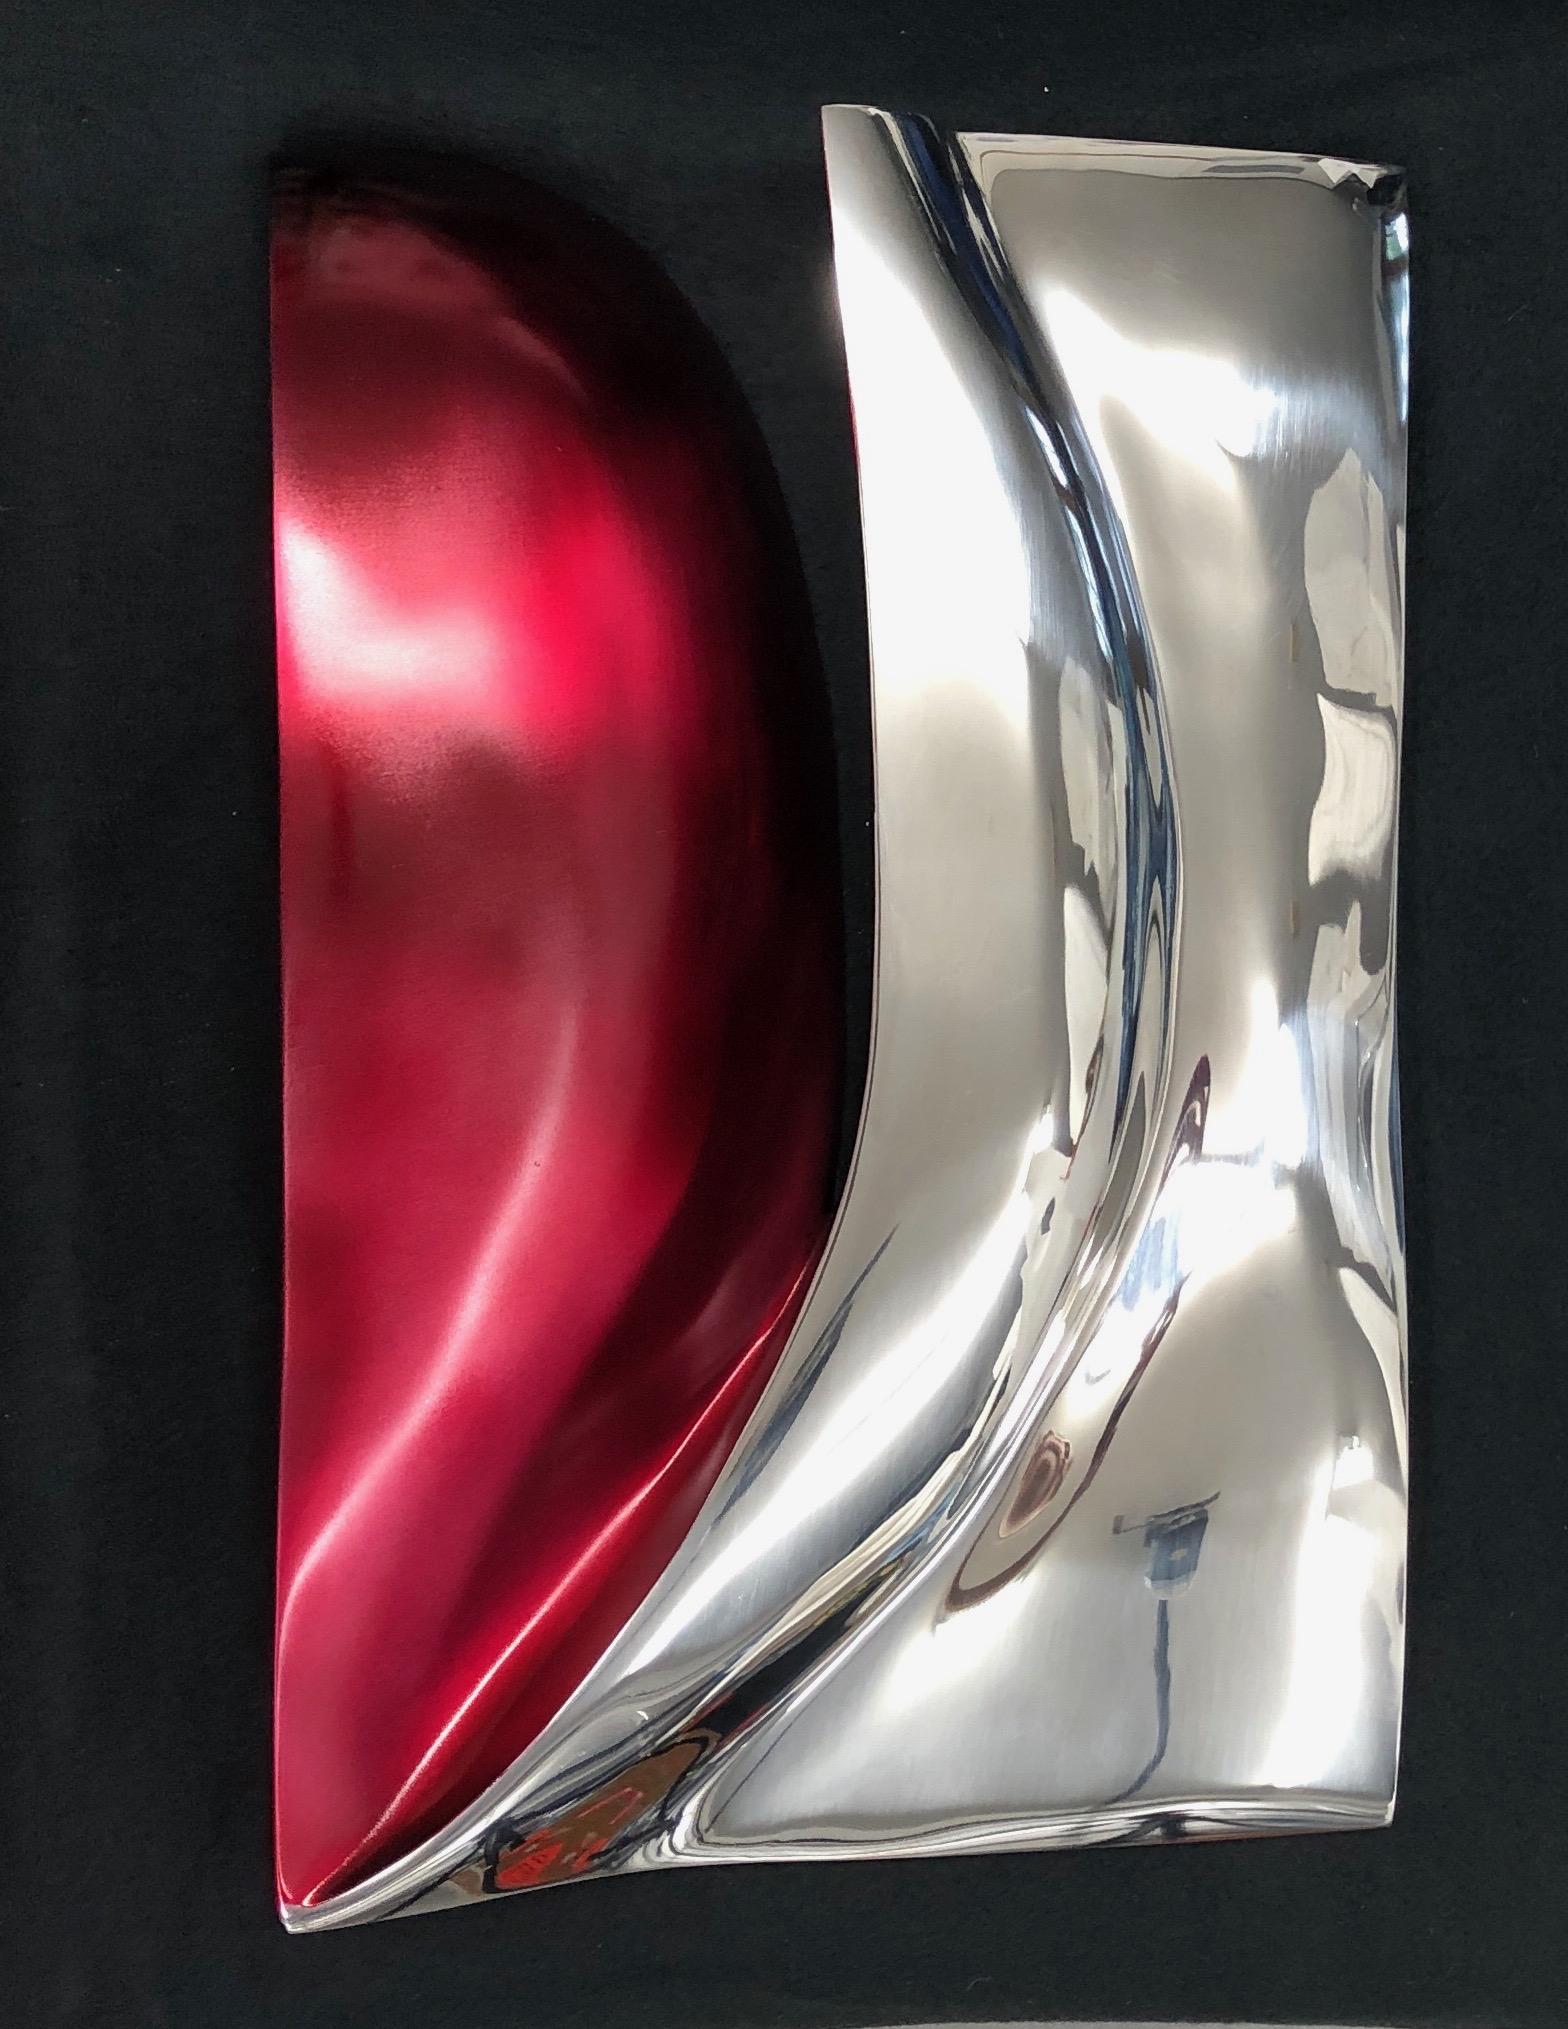 Italian stainless steel with red tint.

Sculptor Santiago Medina Italian stainless steel sculptures are at marquee public art venues worldwide such as Harvard, Stanford University, City of Miami-Pinecrest Circle, Tufts, Washington University,